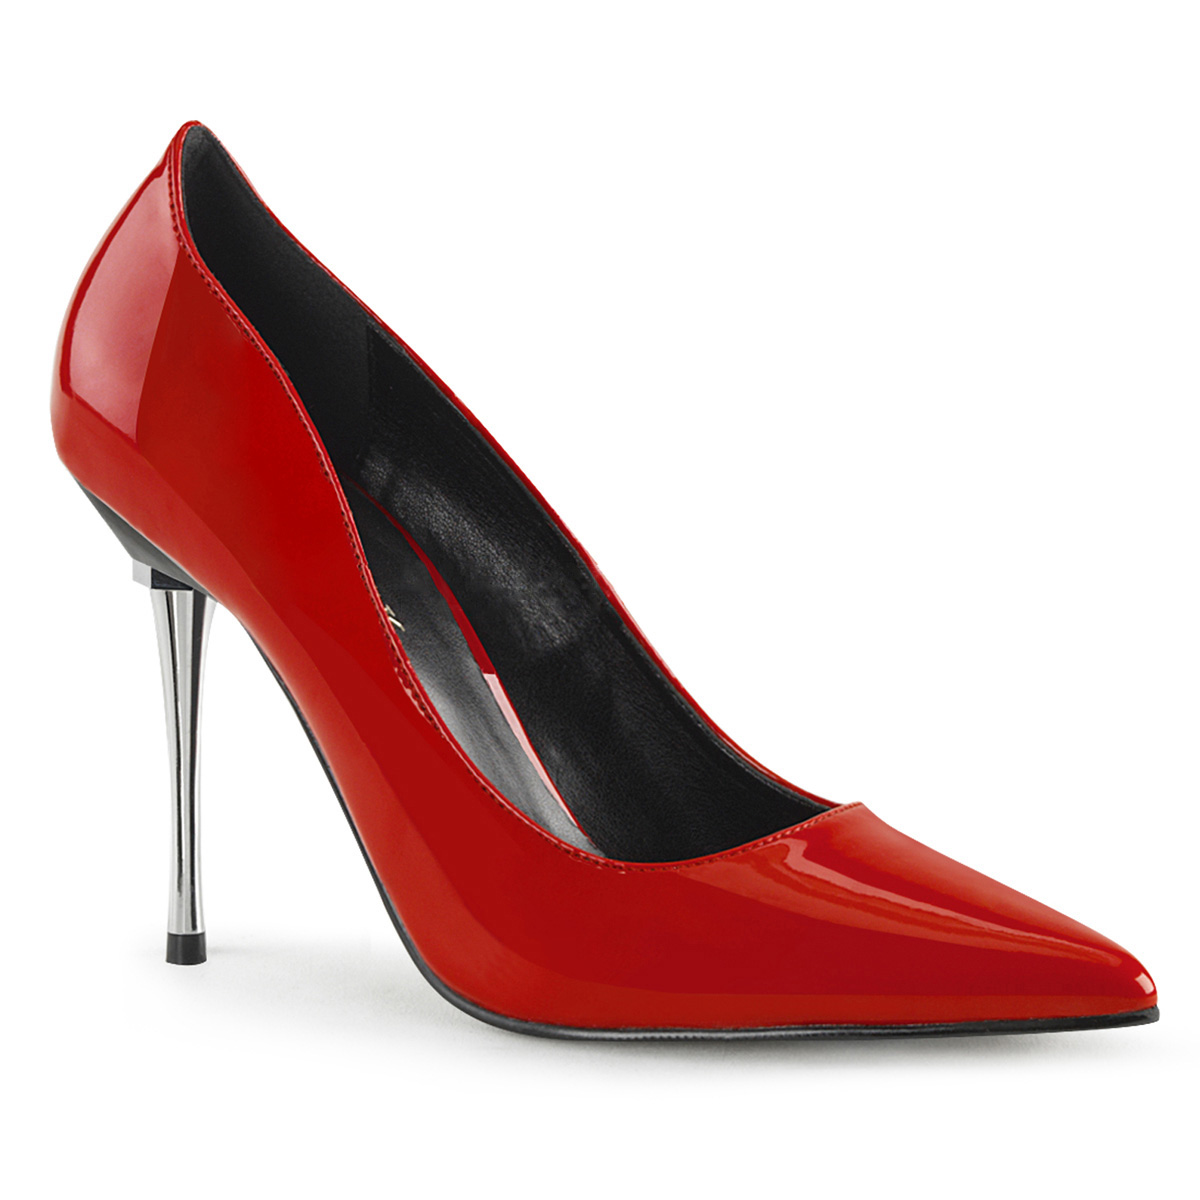 Stiletto Pumps APPEAL-20 - Patent Red, Pleaser